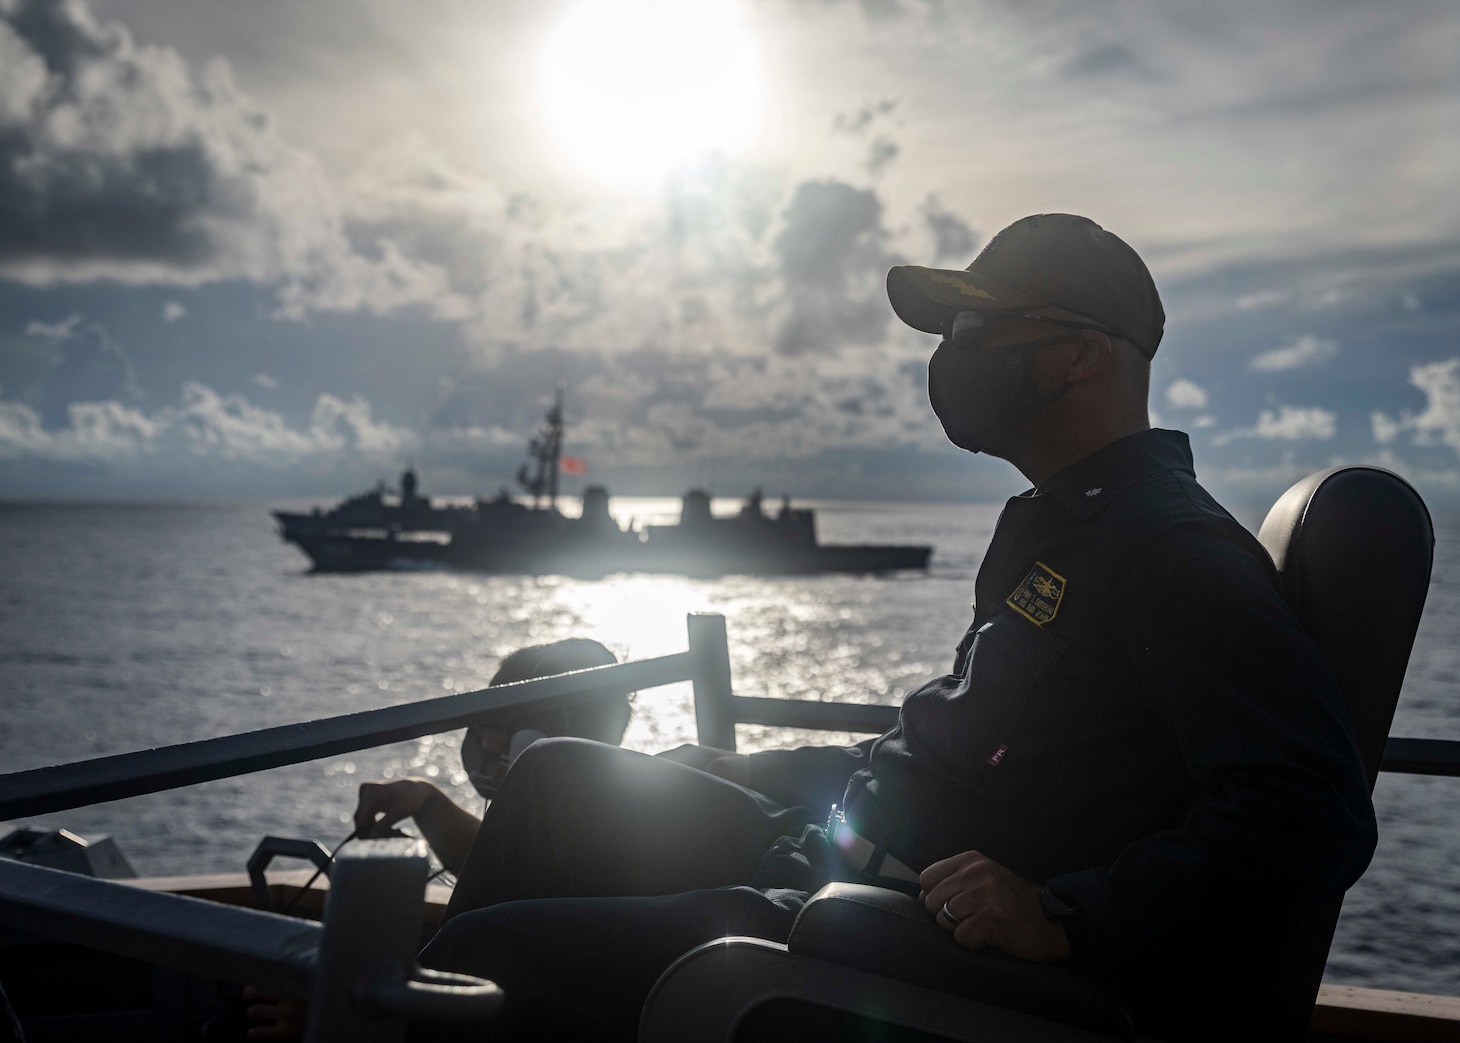 The U.S., JMSDF, and Royal Australian Navy conduct trilateral exercises in the South China Sea.